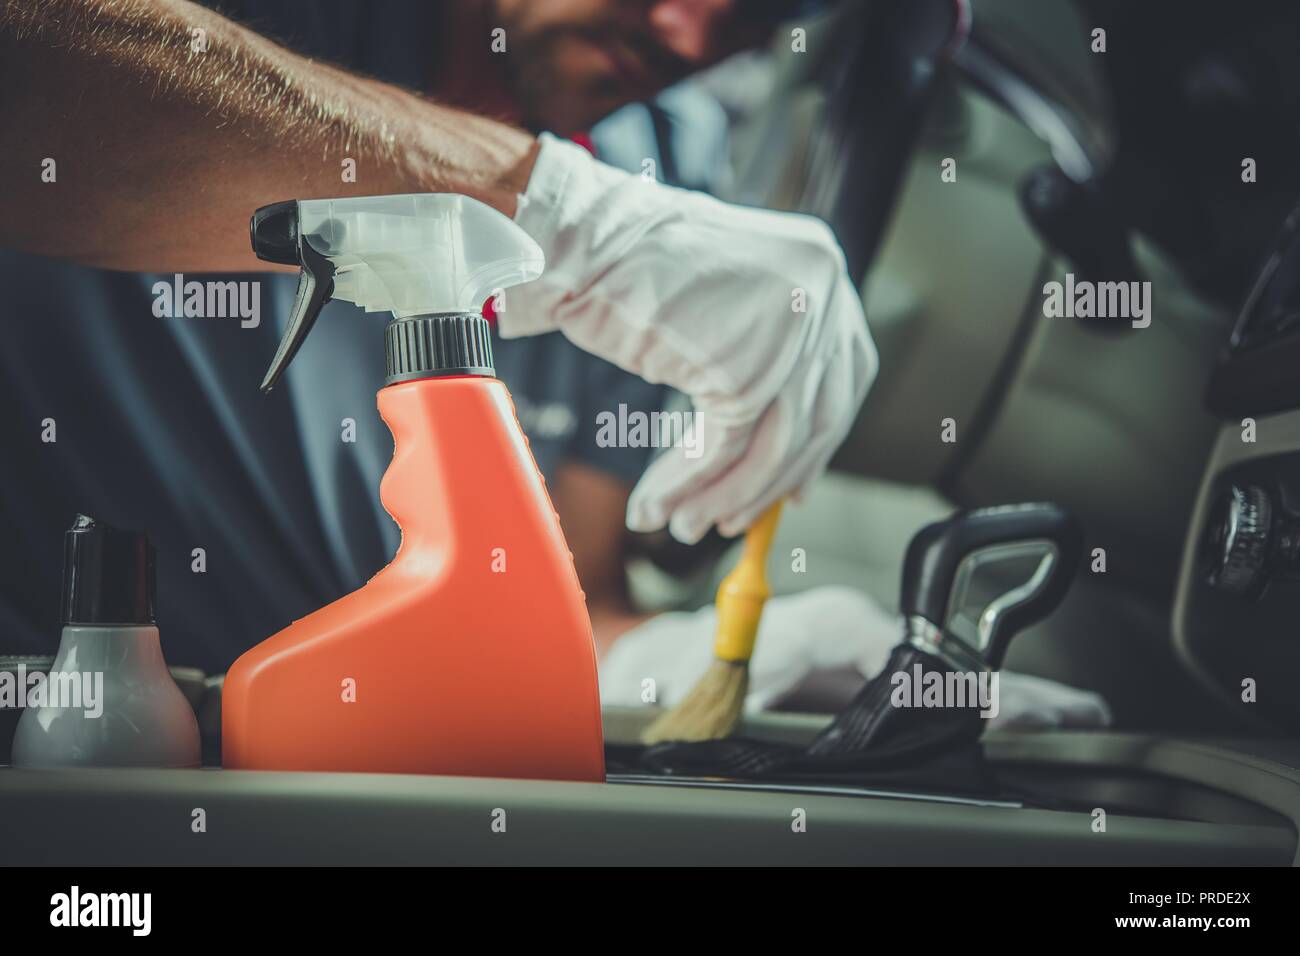 Car Care Cleaning Product. Detergent Bottle and Caucasian Worker Detailing Vehicle. Stock Photo